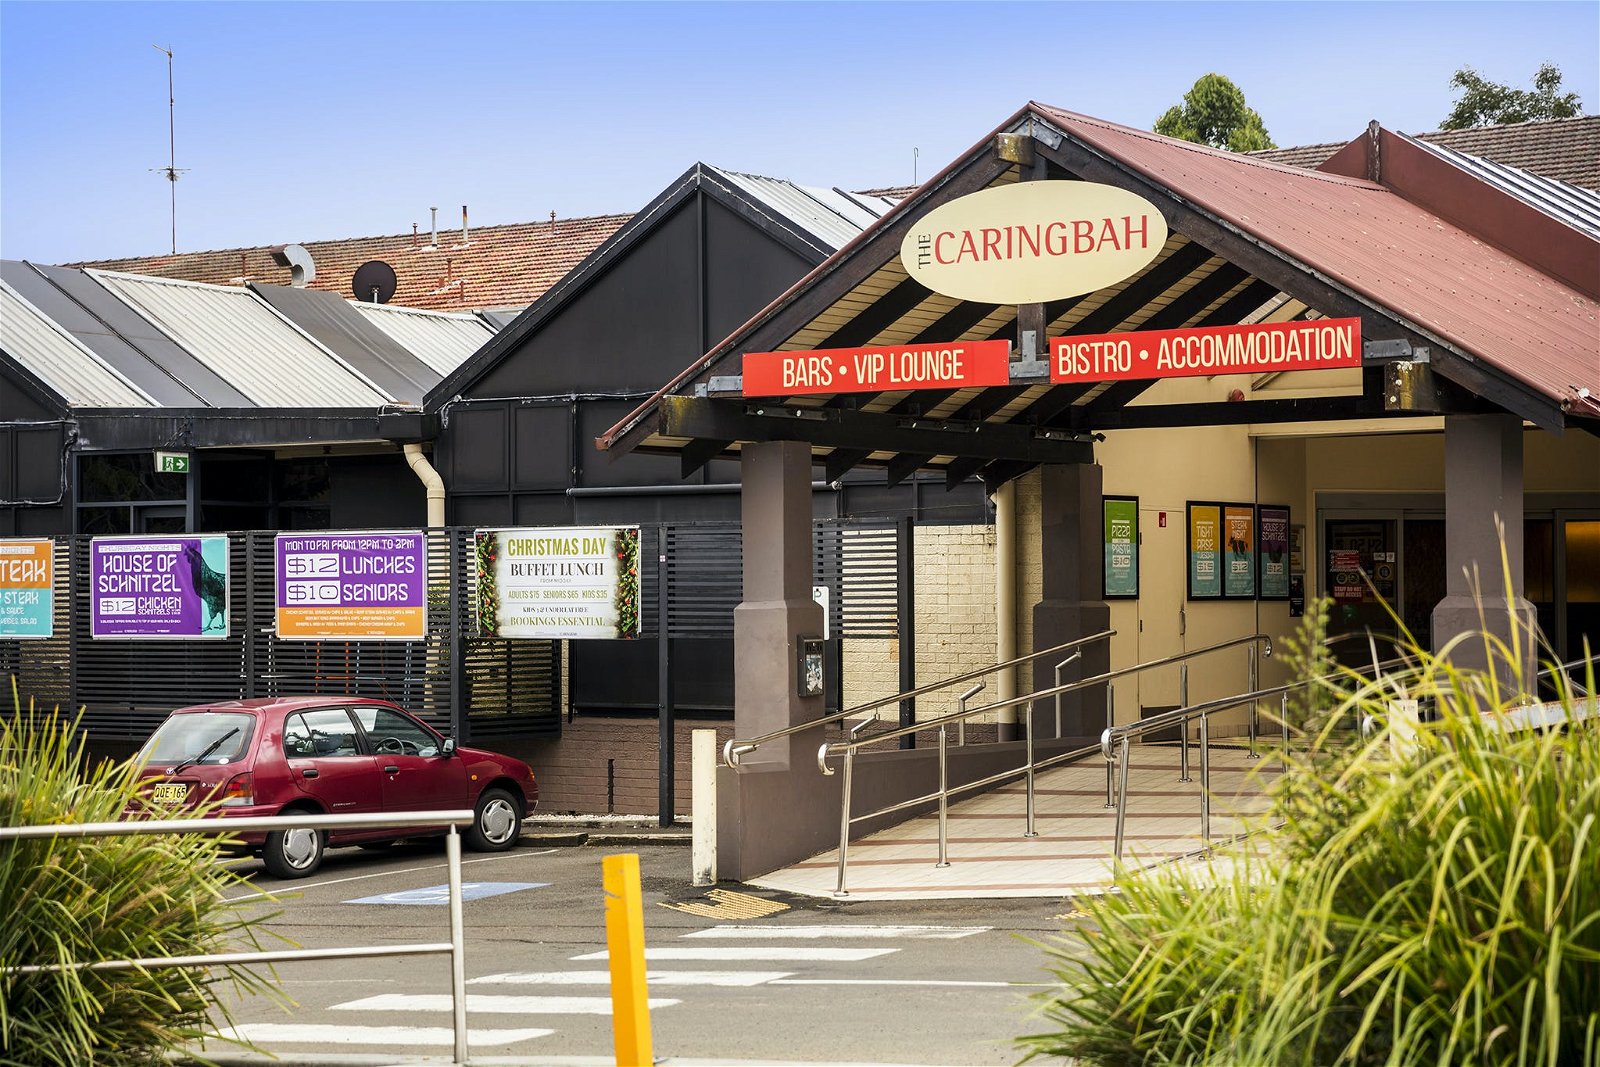 Graziers Grill House - Caringbah Hotel - Northern Rivers Accommodation